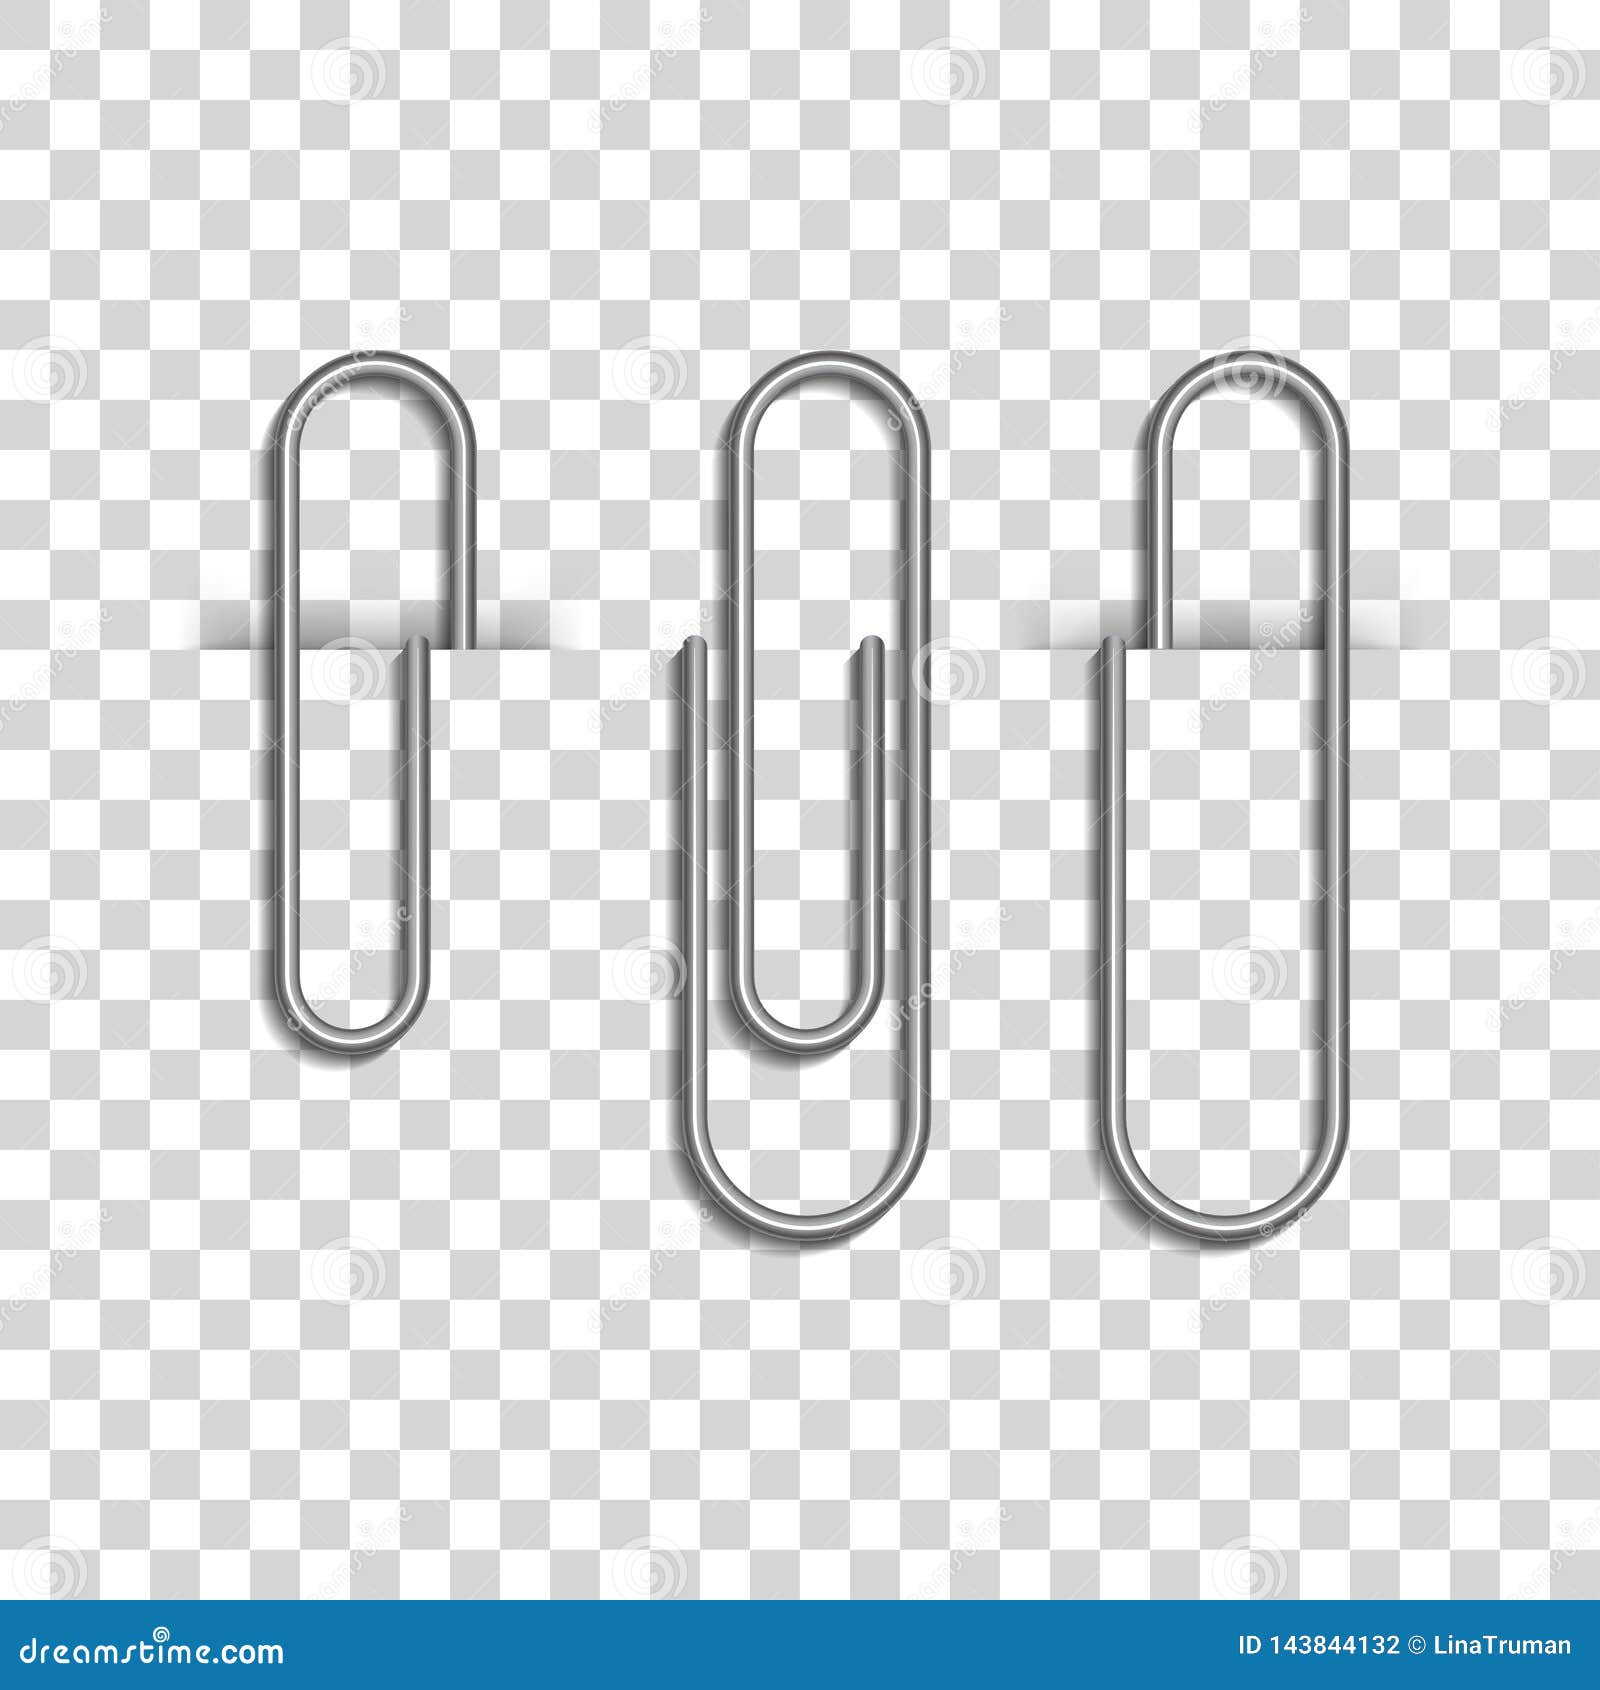 metal paper clips  on transparent background. metal paper clips attached to paper.  